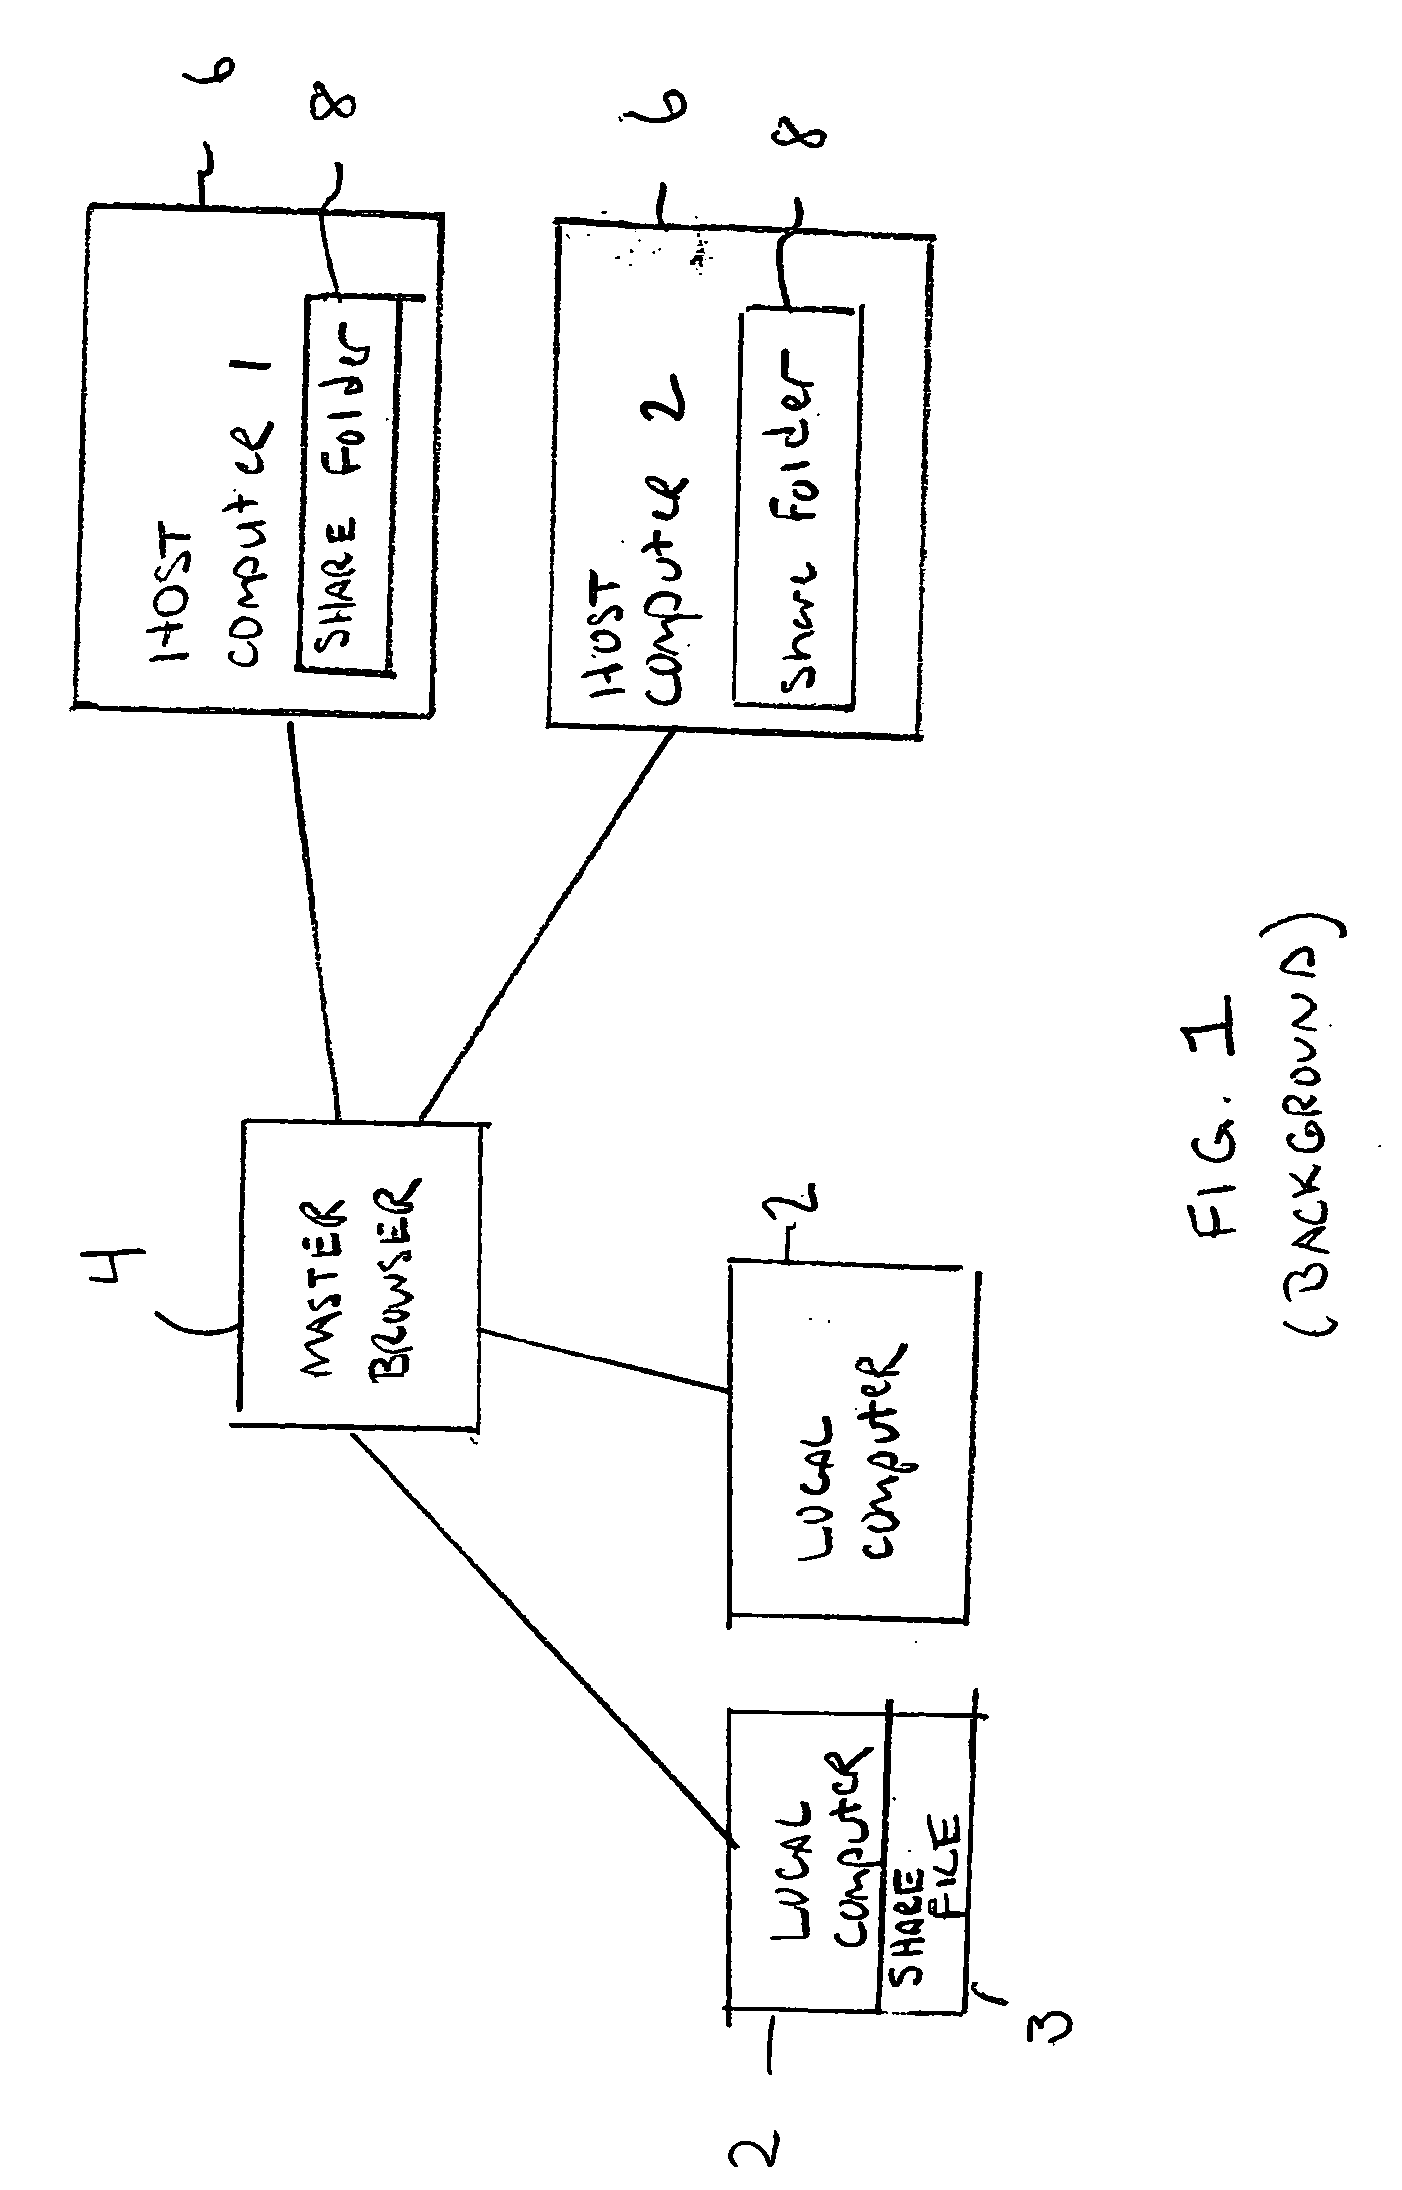 System for remote share access